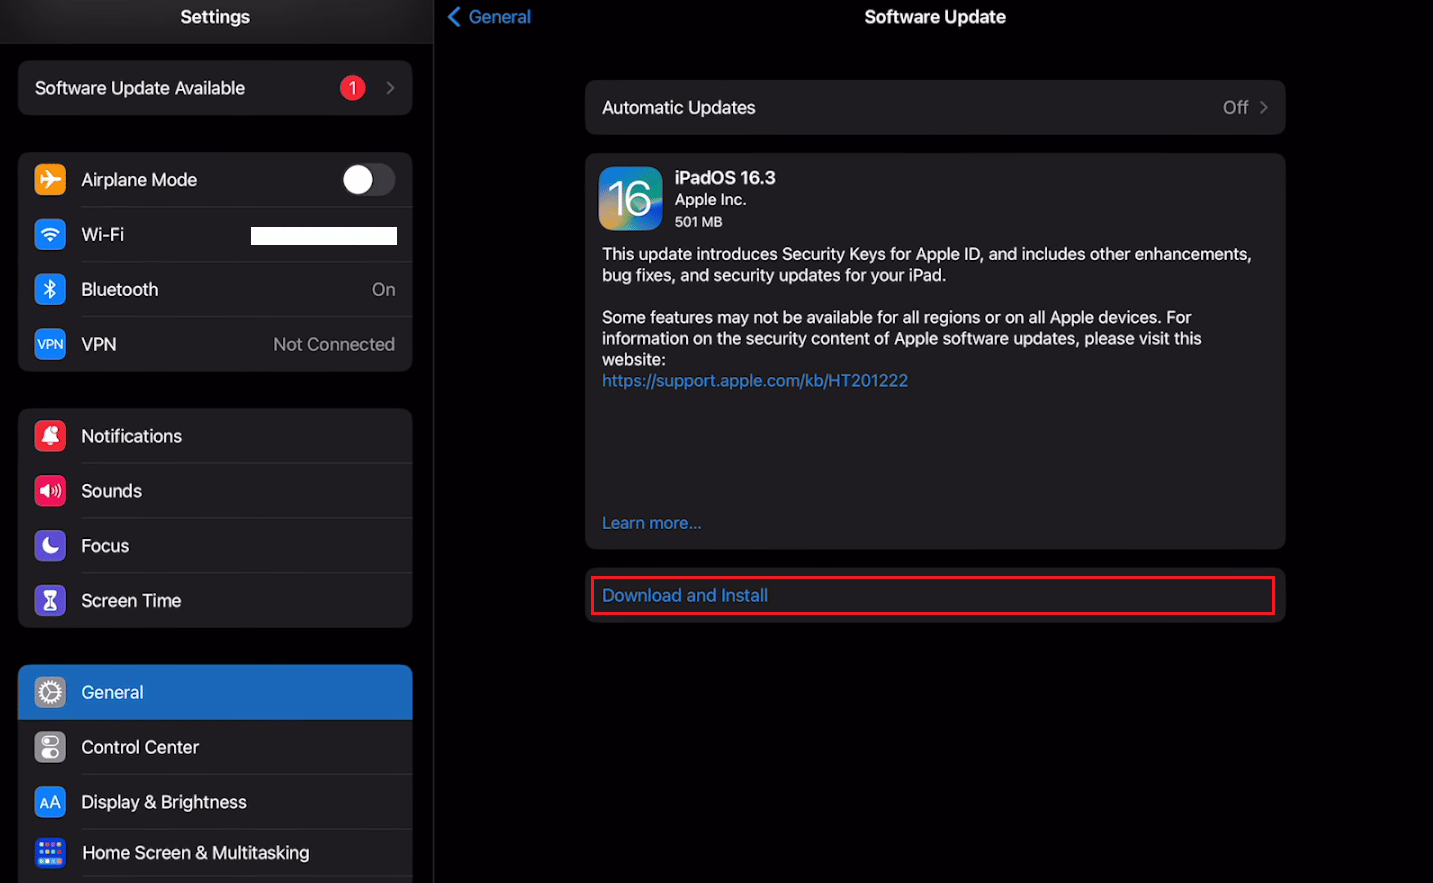 Tap on the Download and Install option to update your iPadOS to the latest version